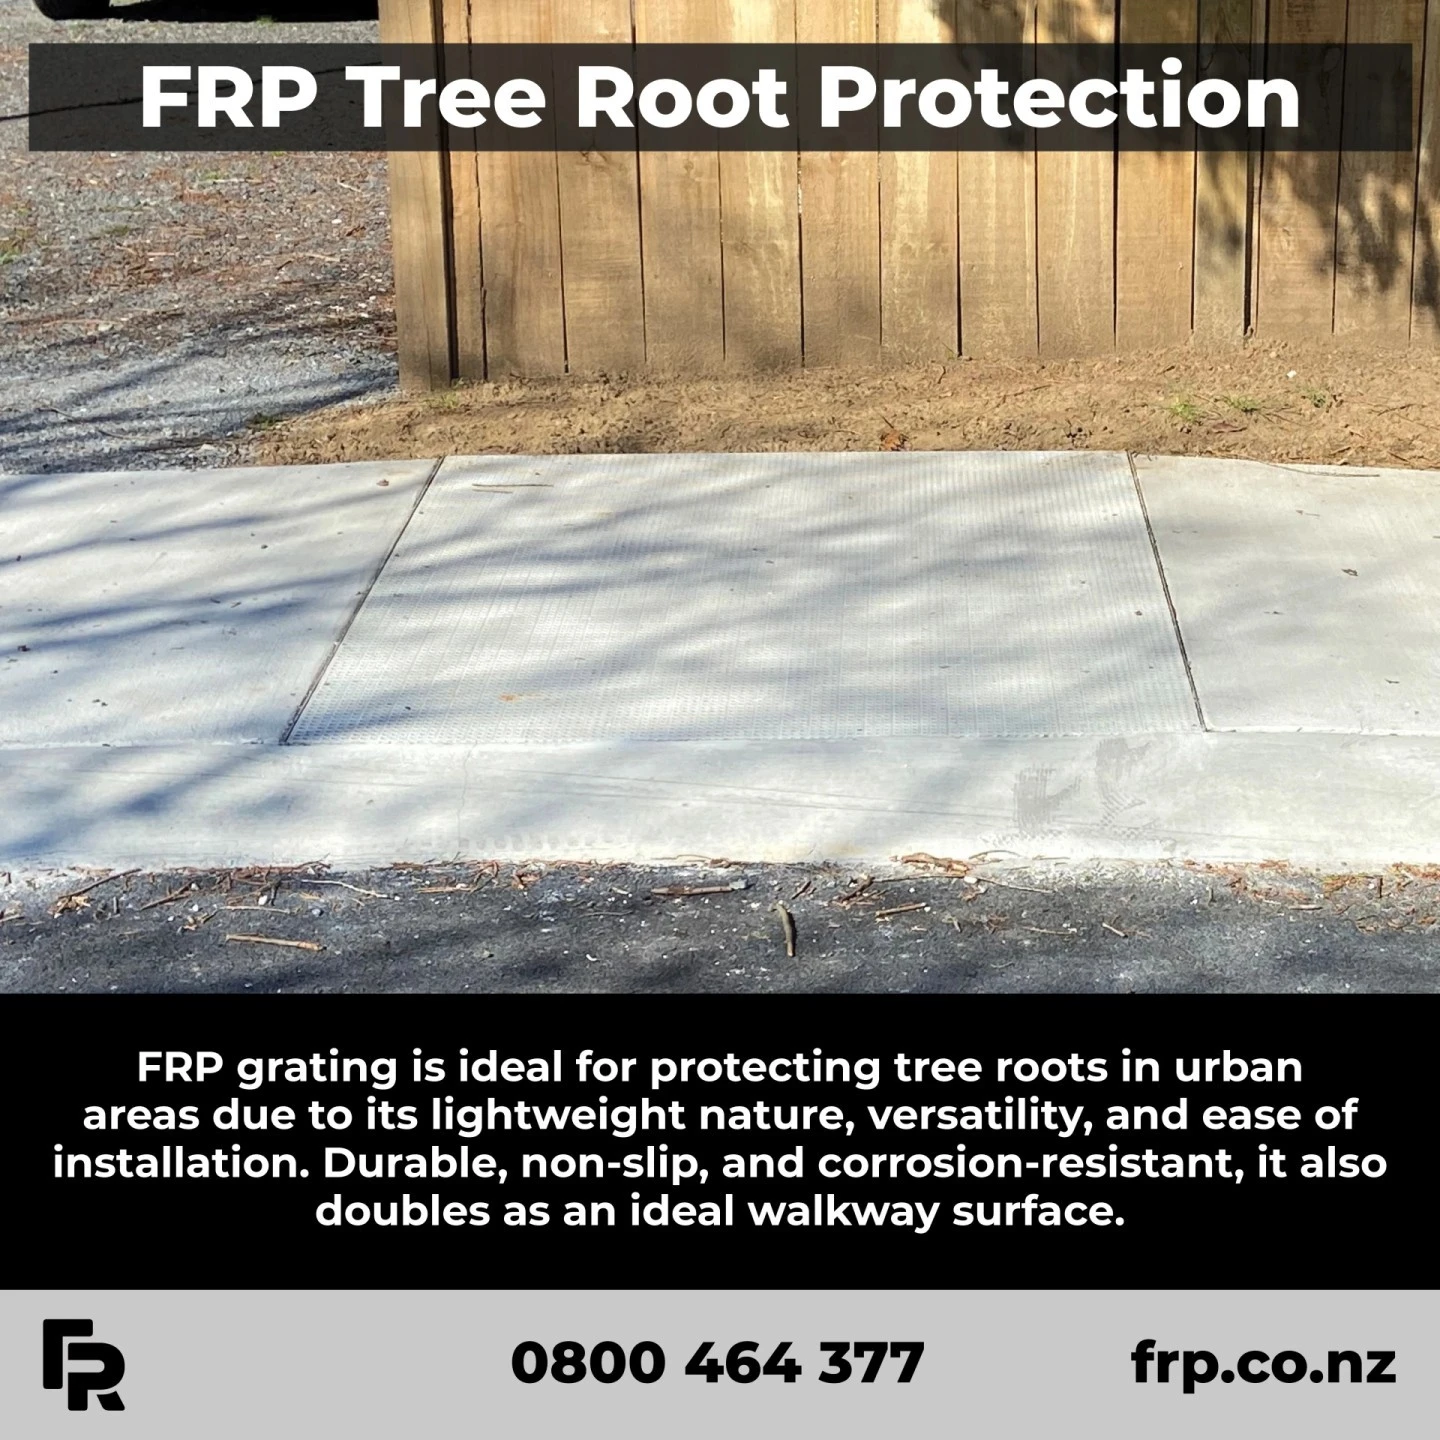 Speak with us about your project details today.

#frp #frpproducts #commercial #industrial #footpaths #walkways #nzconstruction #cityplanning #councils #civil #nzarchitects #publicspaces